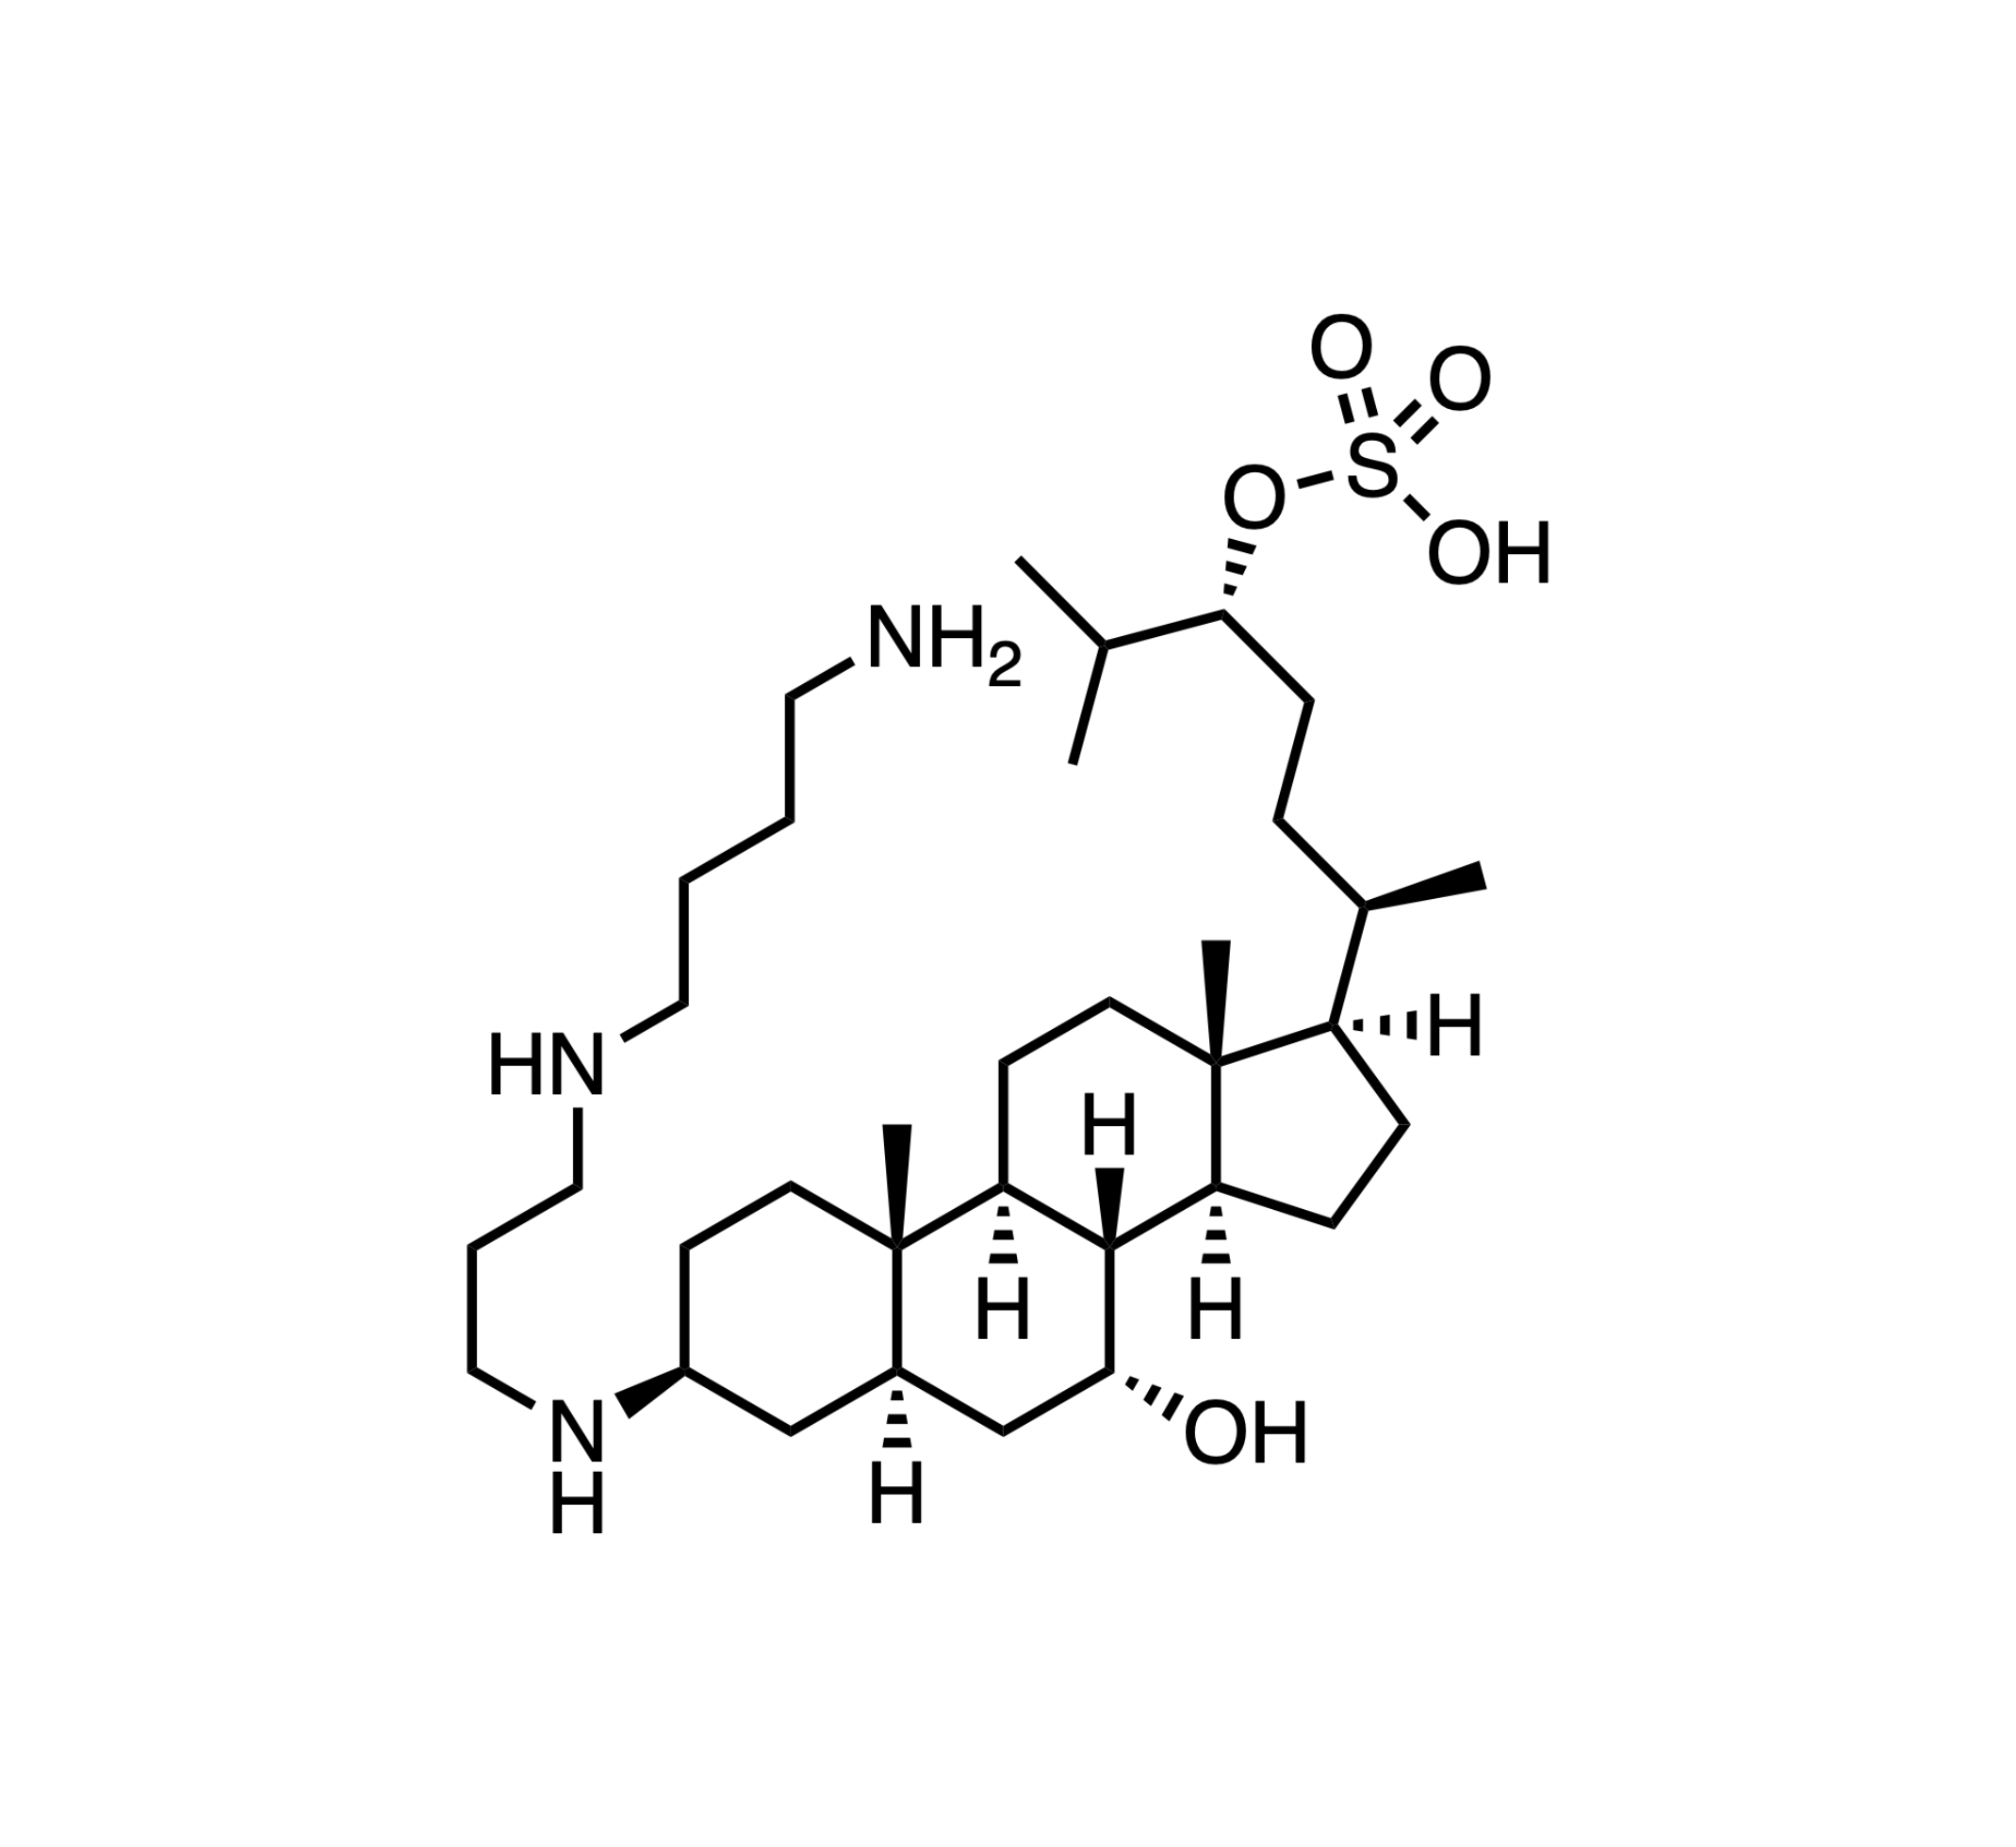 ENT-01 chemical structure oral ⍺-synuclein aggregation inhibitor- Enterin Inc., Philadelphia, PA||